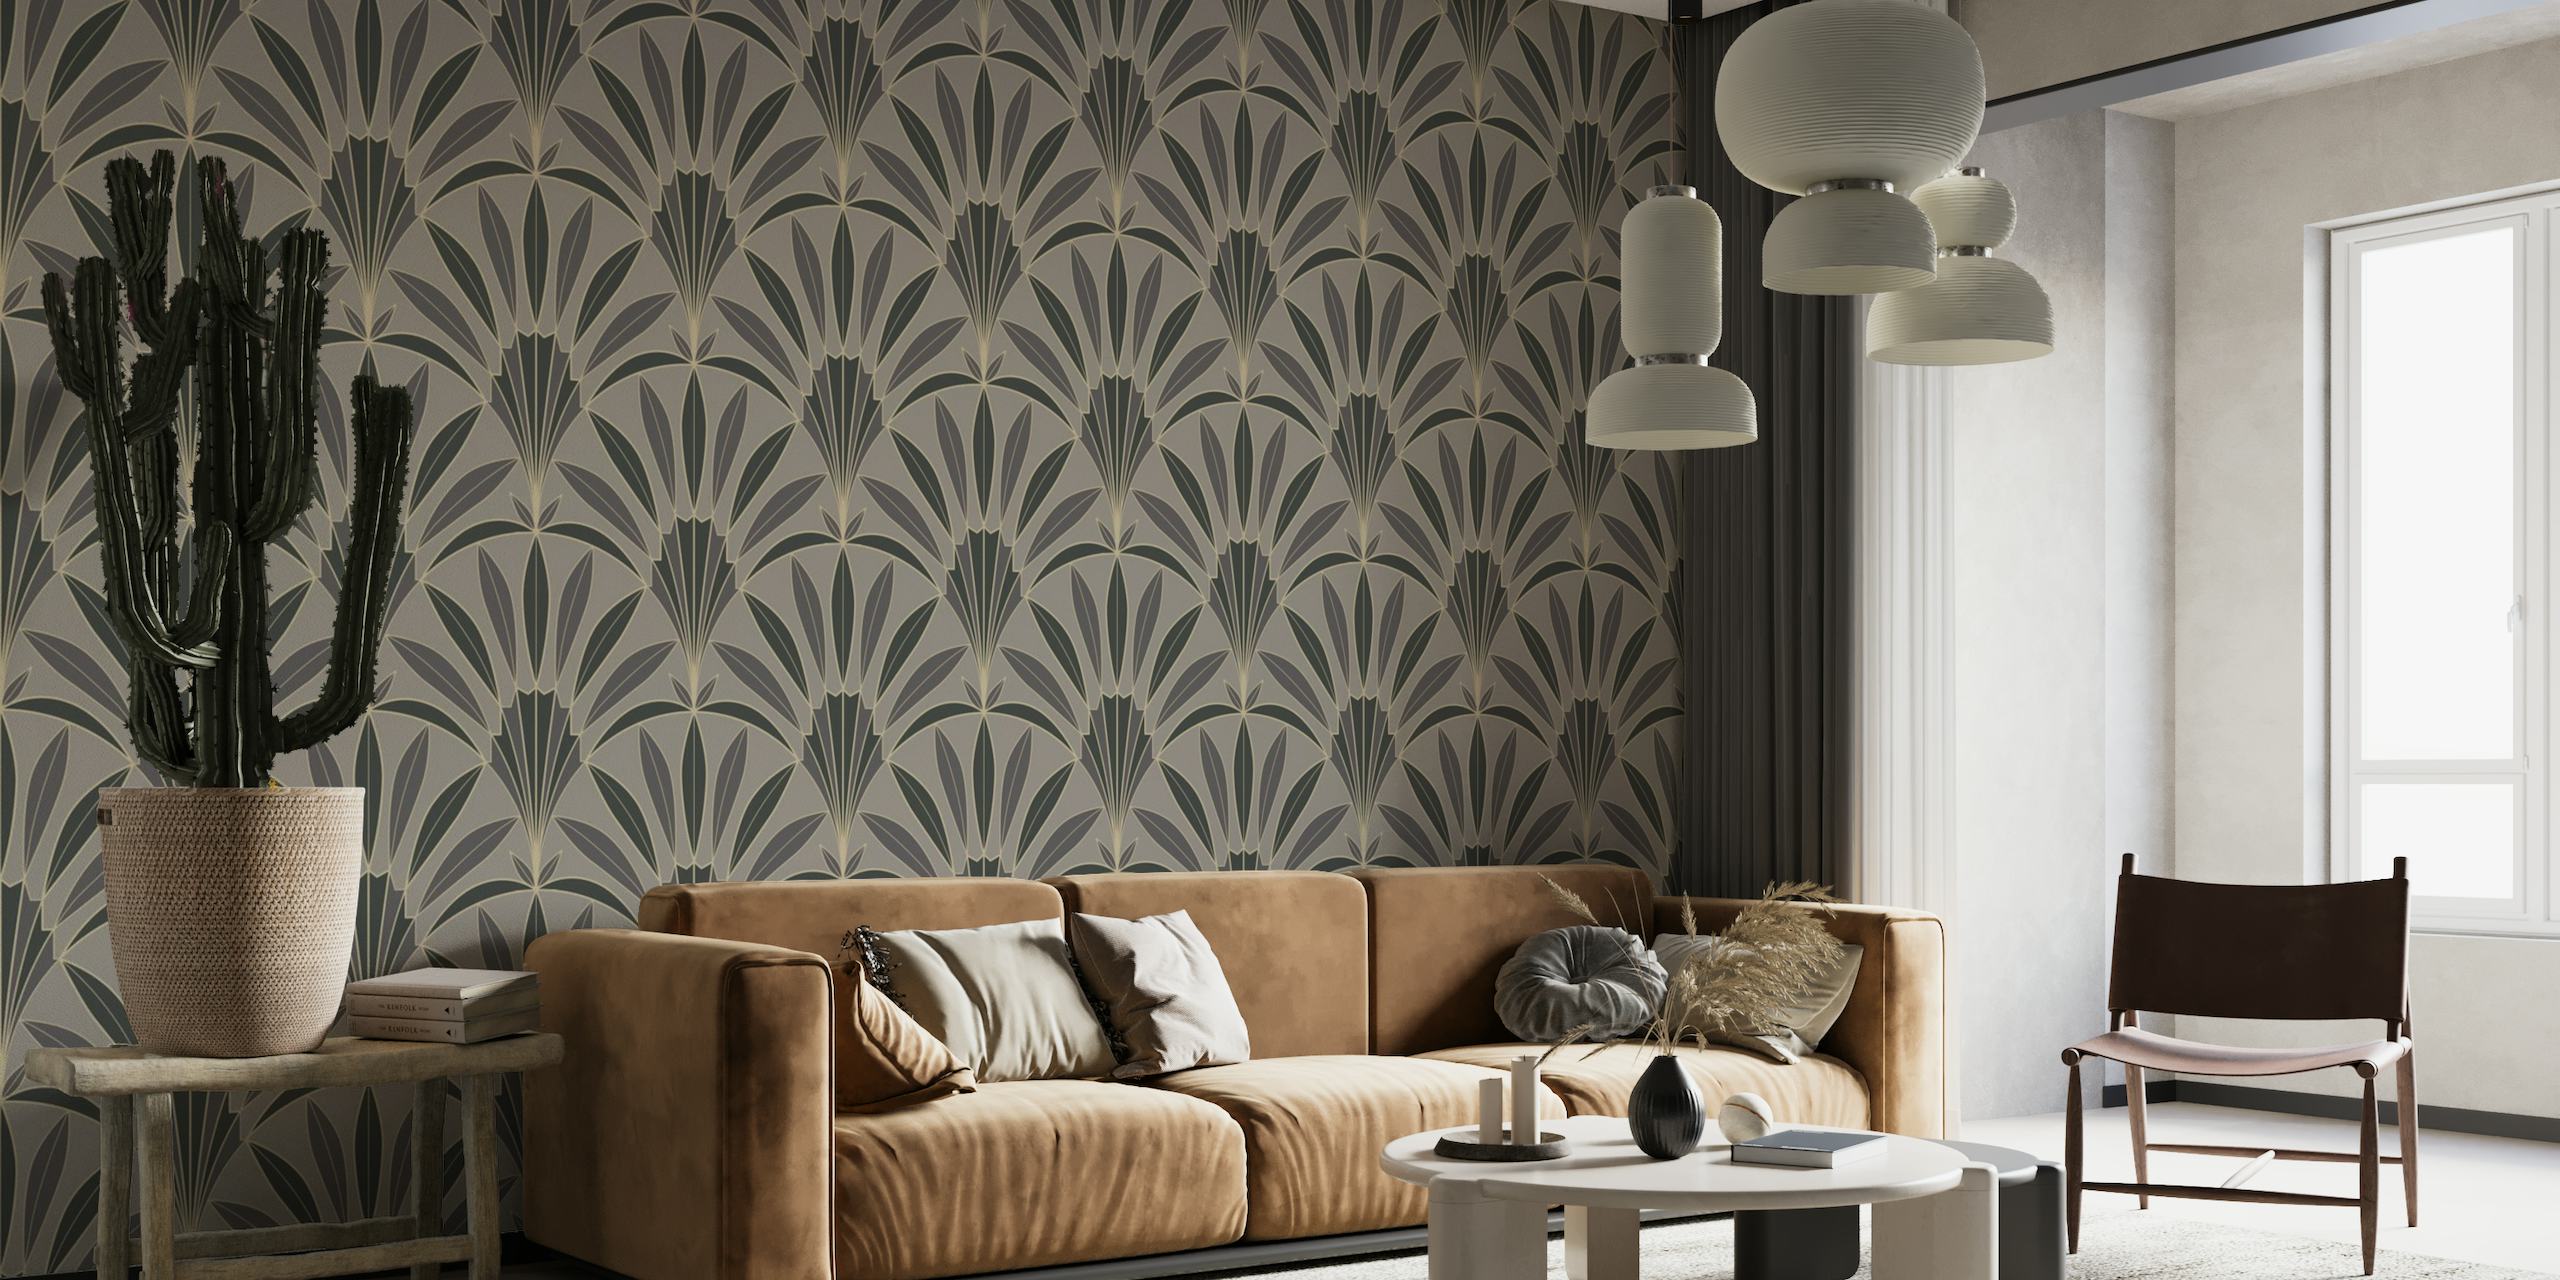 Art Deco Palm Leaves Fan design in taupe and anthracite for wall mural